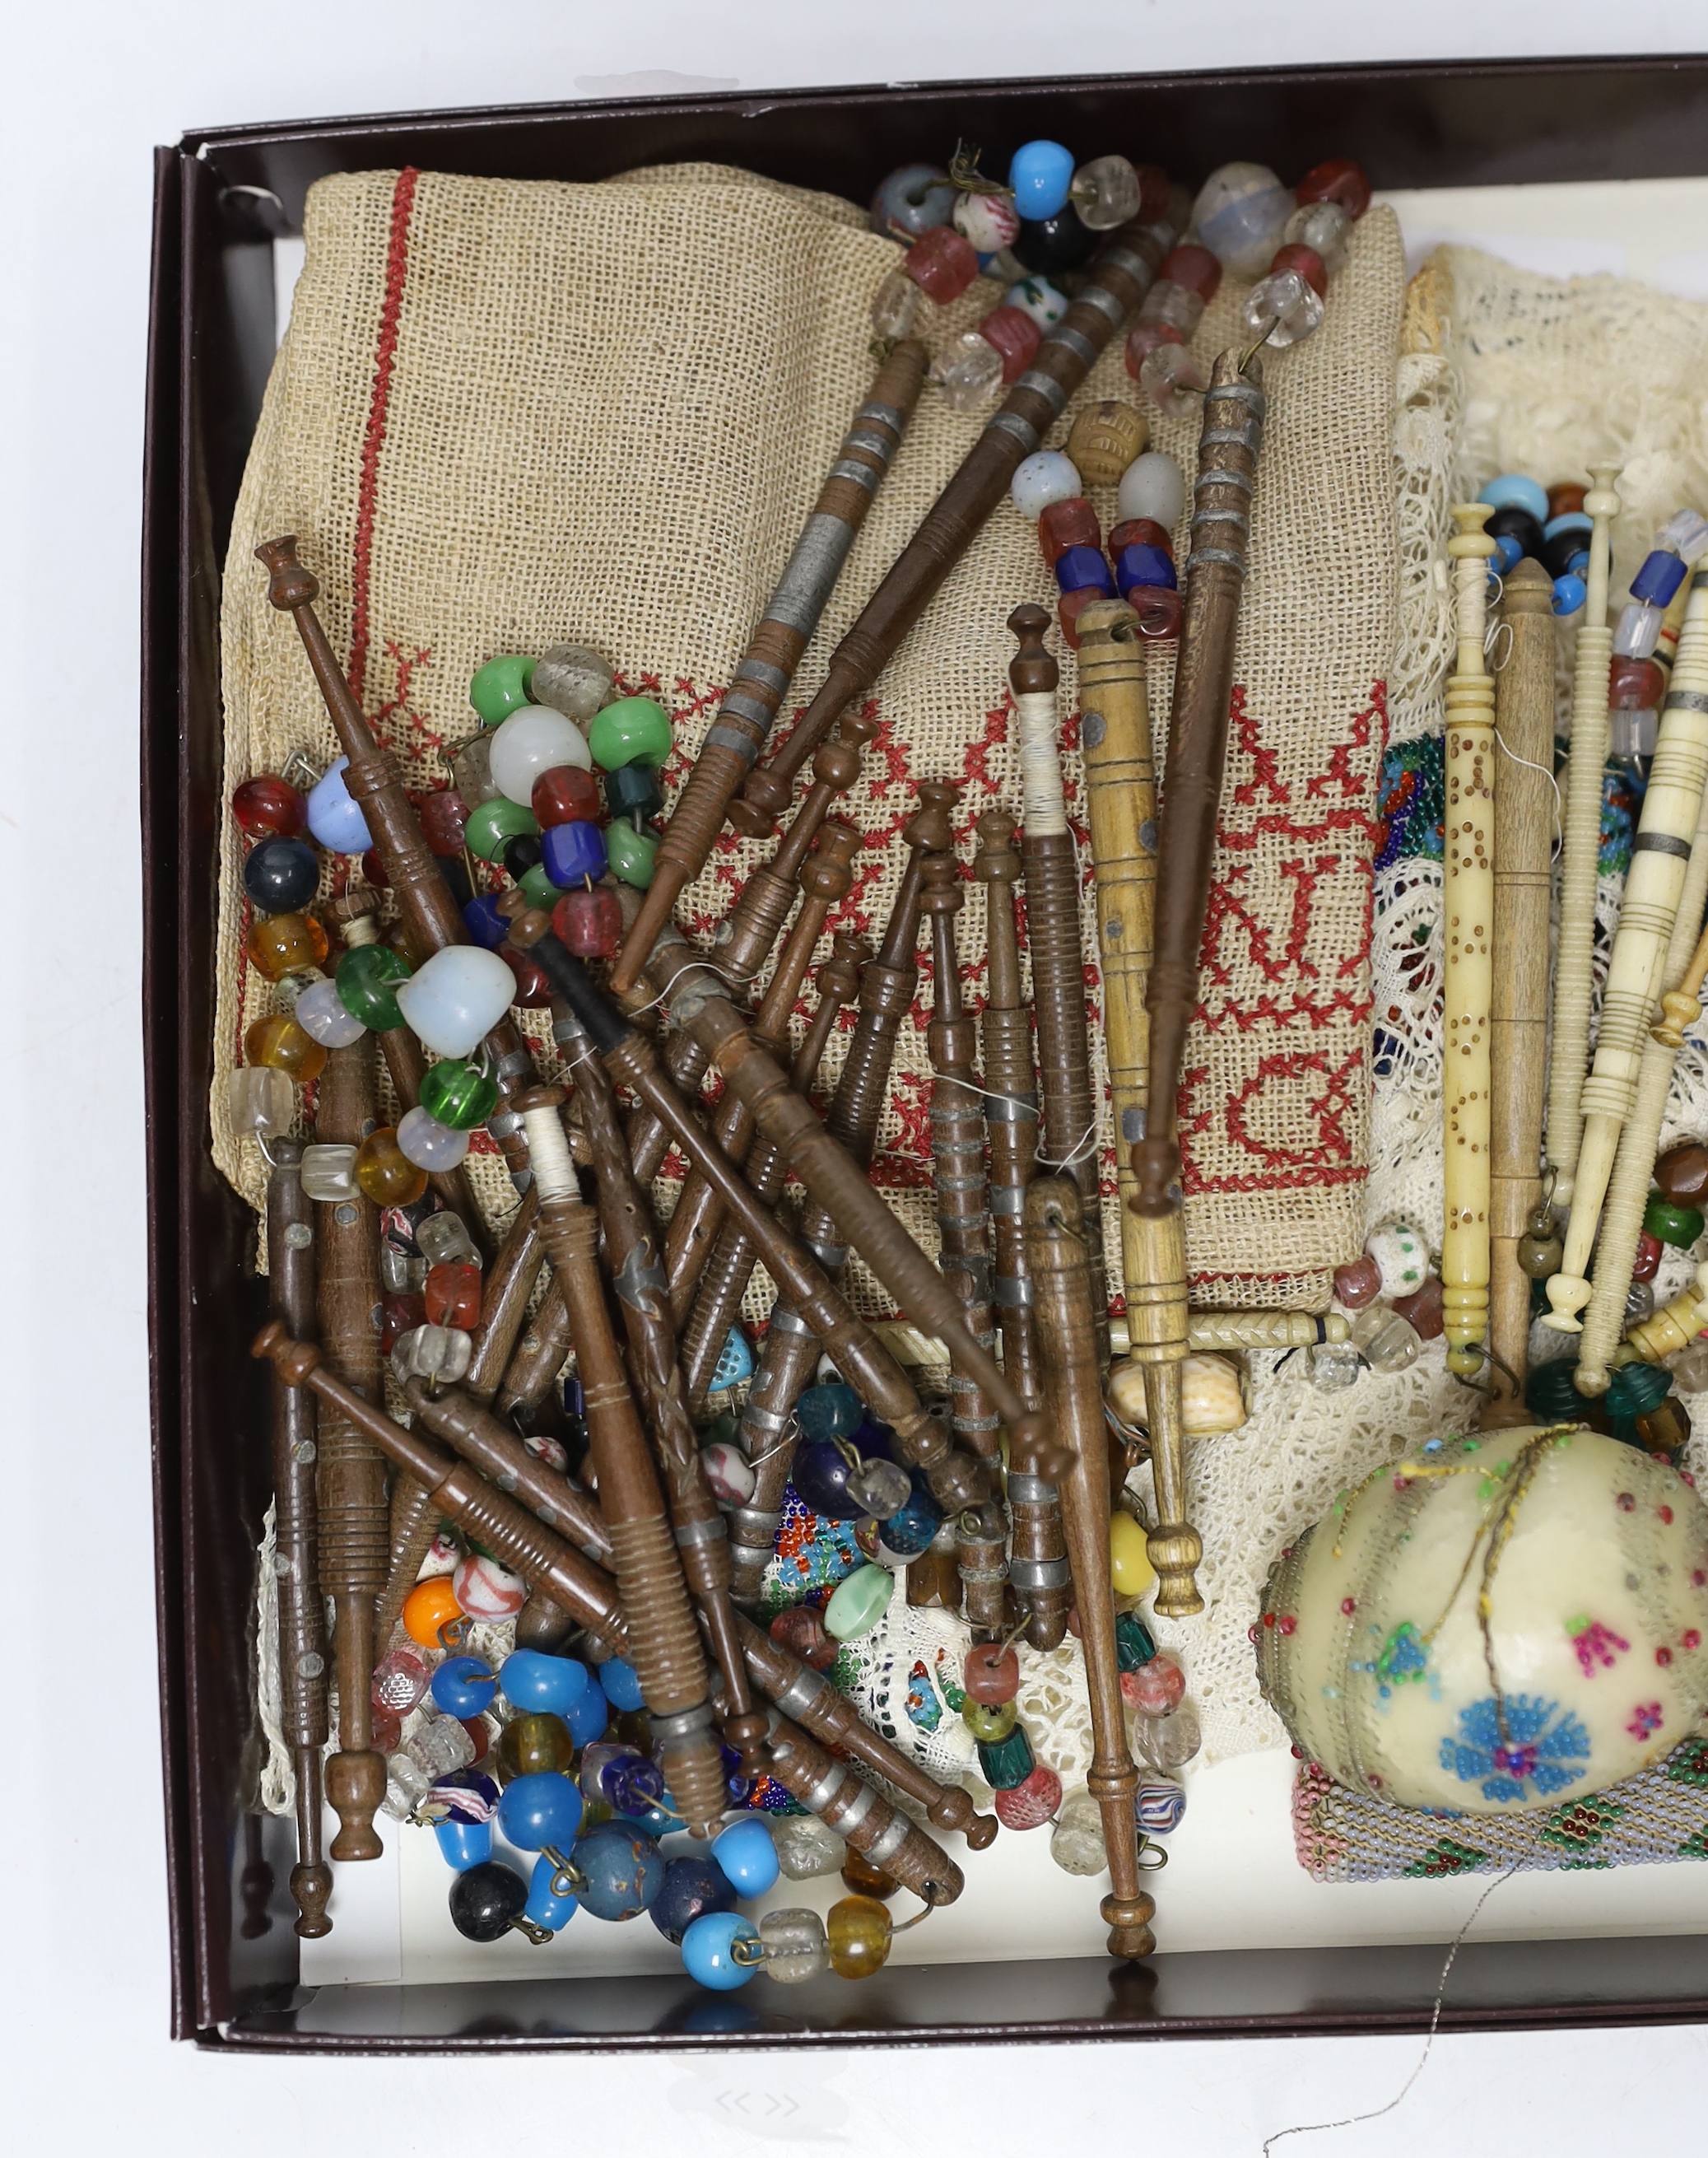 Sewing items: including a collection of bone and wooden lace maker’s bobbins, a beadworked needlecase, an egg and beadworked mats, etc.